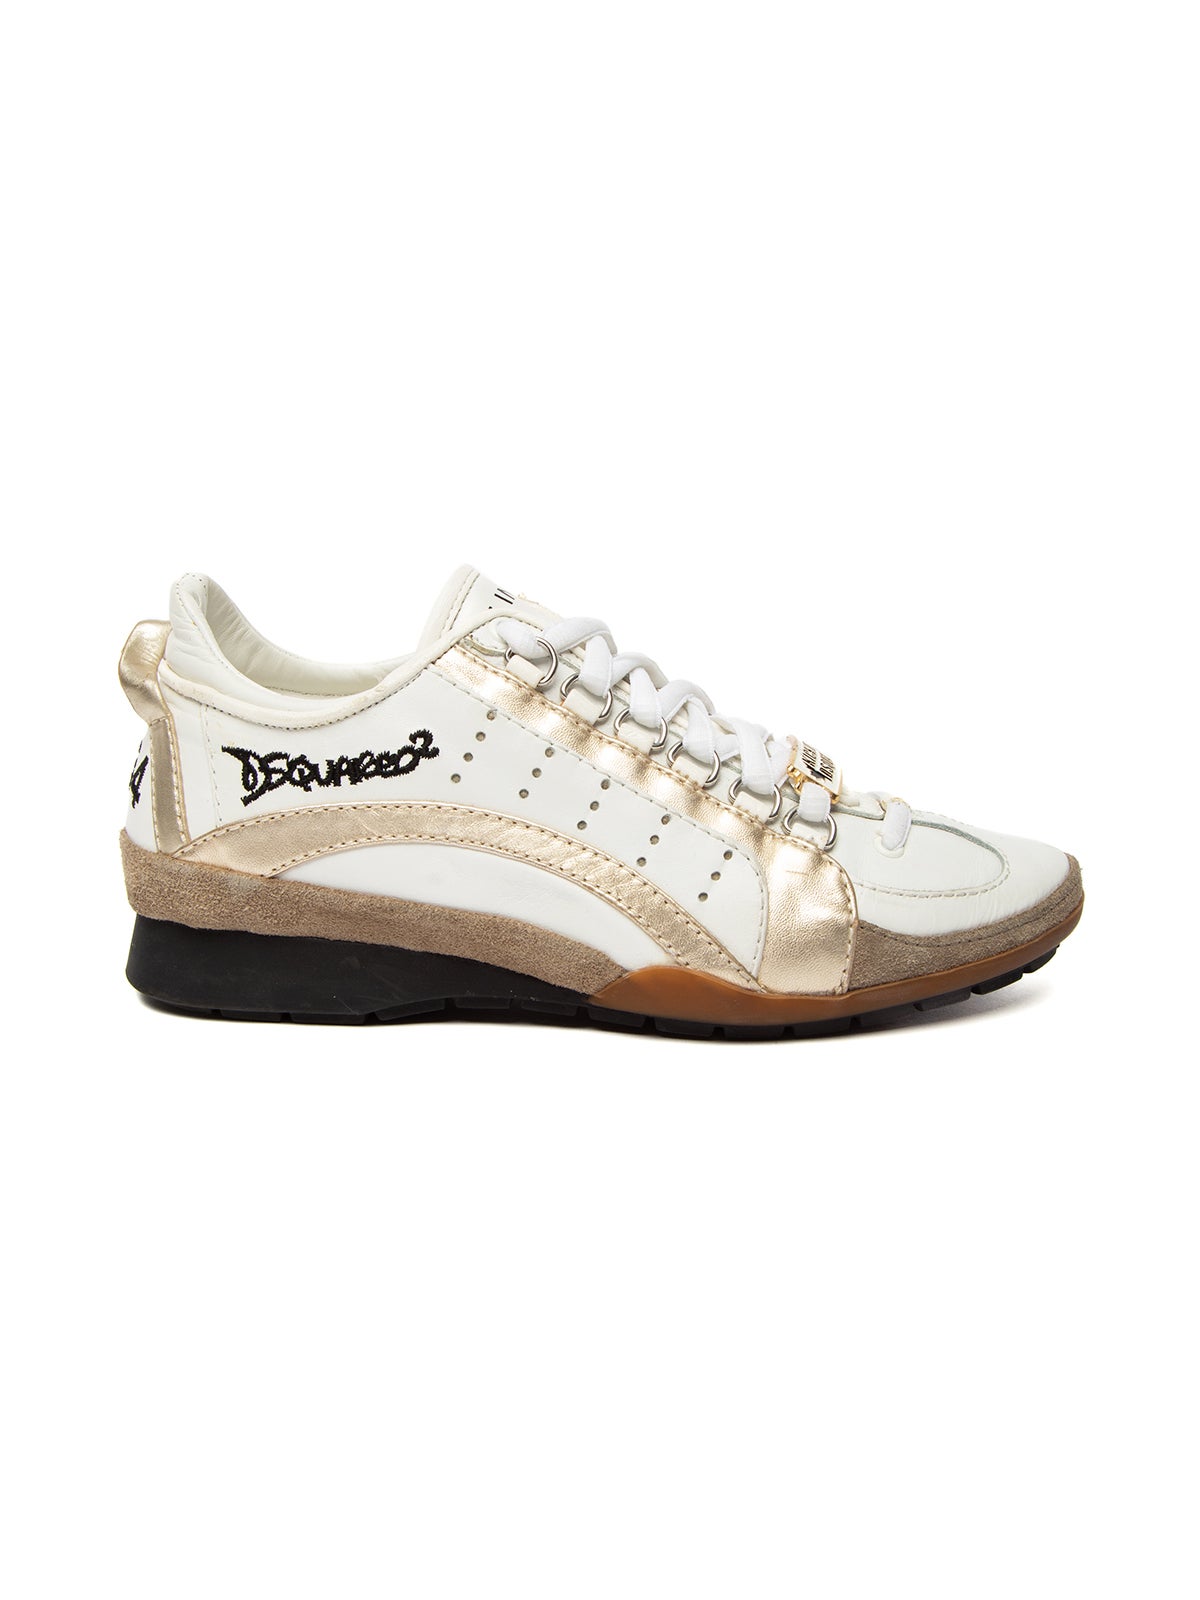 Pre-Loved Dsquared2 Women's Kick It! Sneakers in White For Sale at 1stDibs